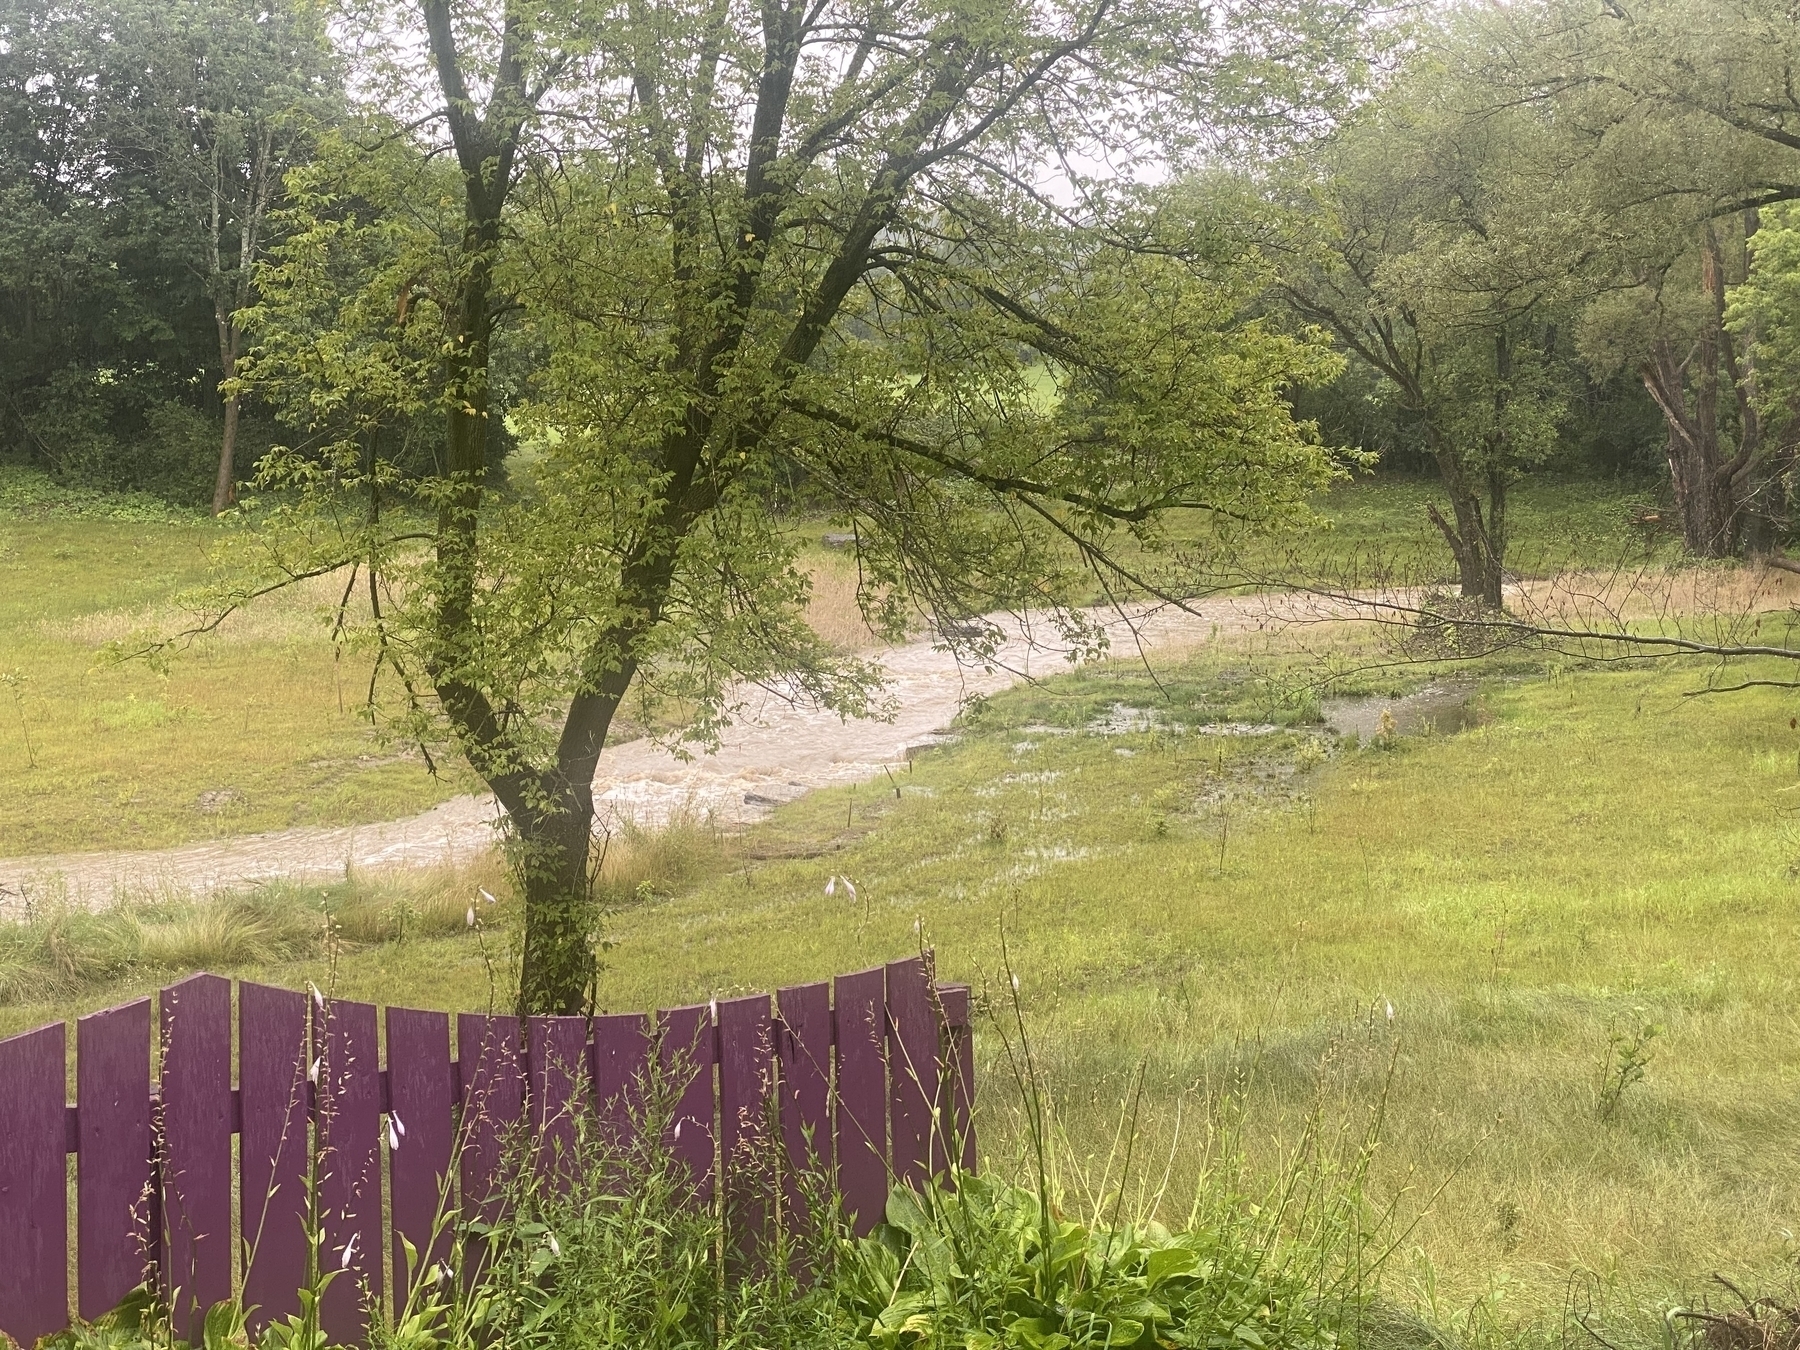 A very full and fast creek with a purple fence in the foreground and a tree between the fence and creek.